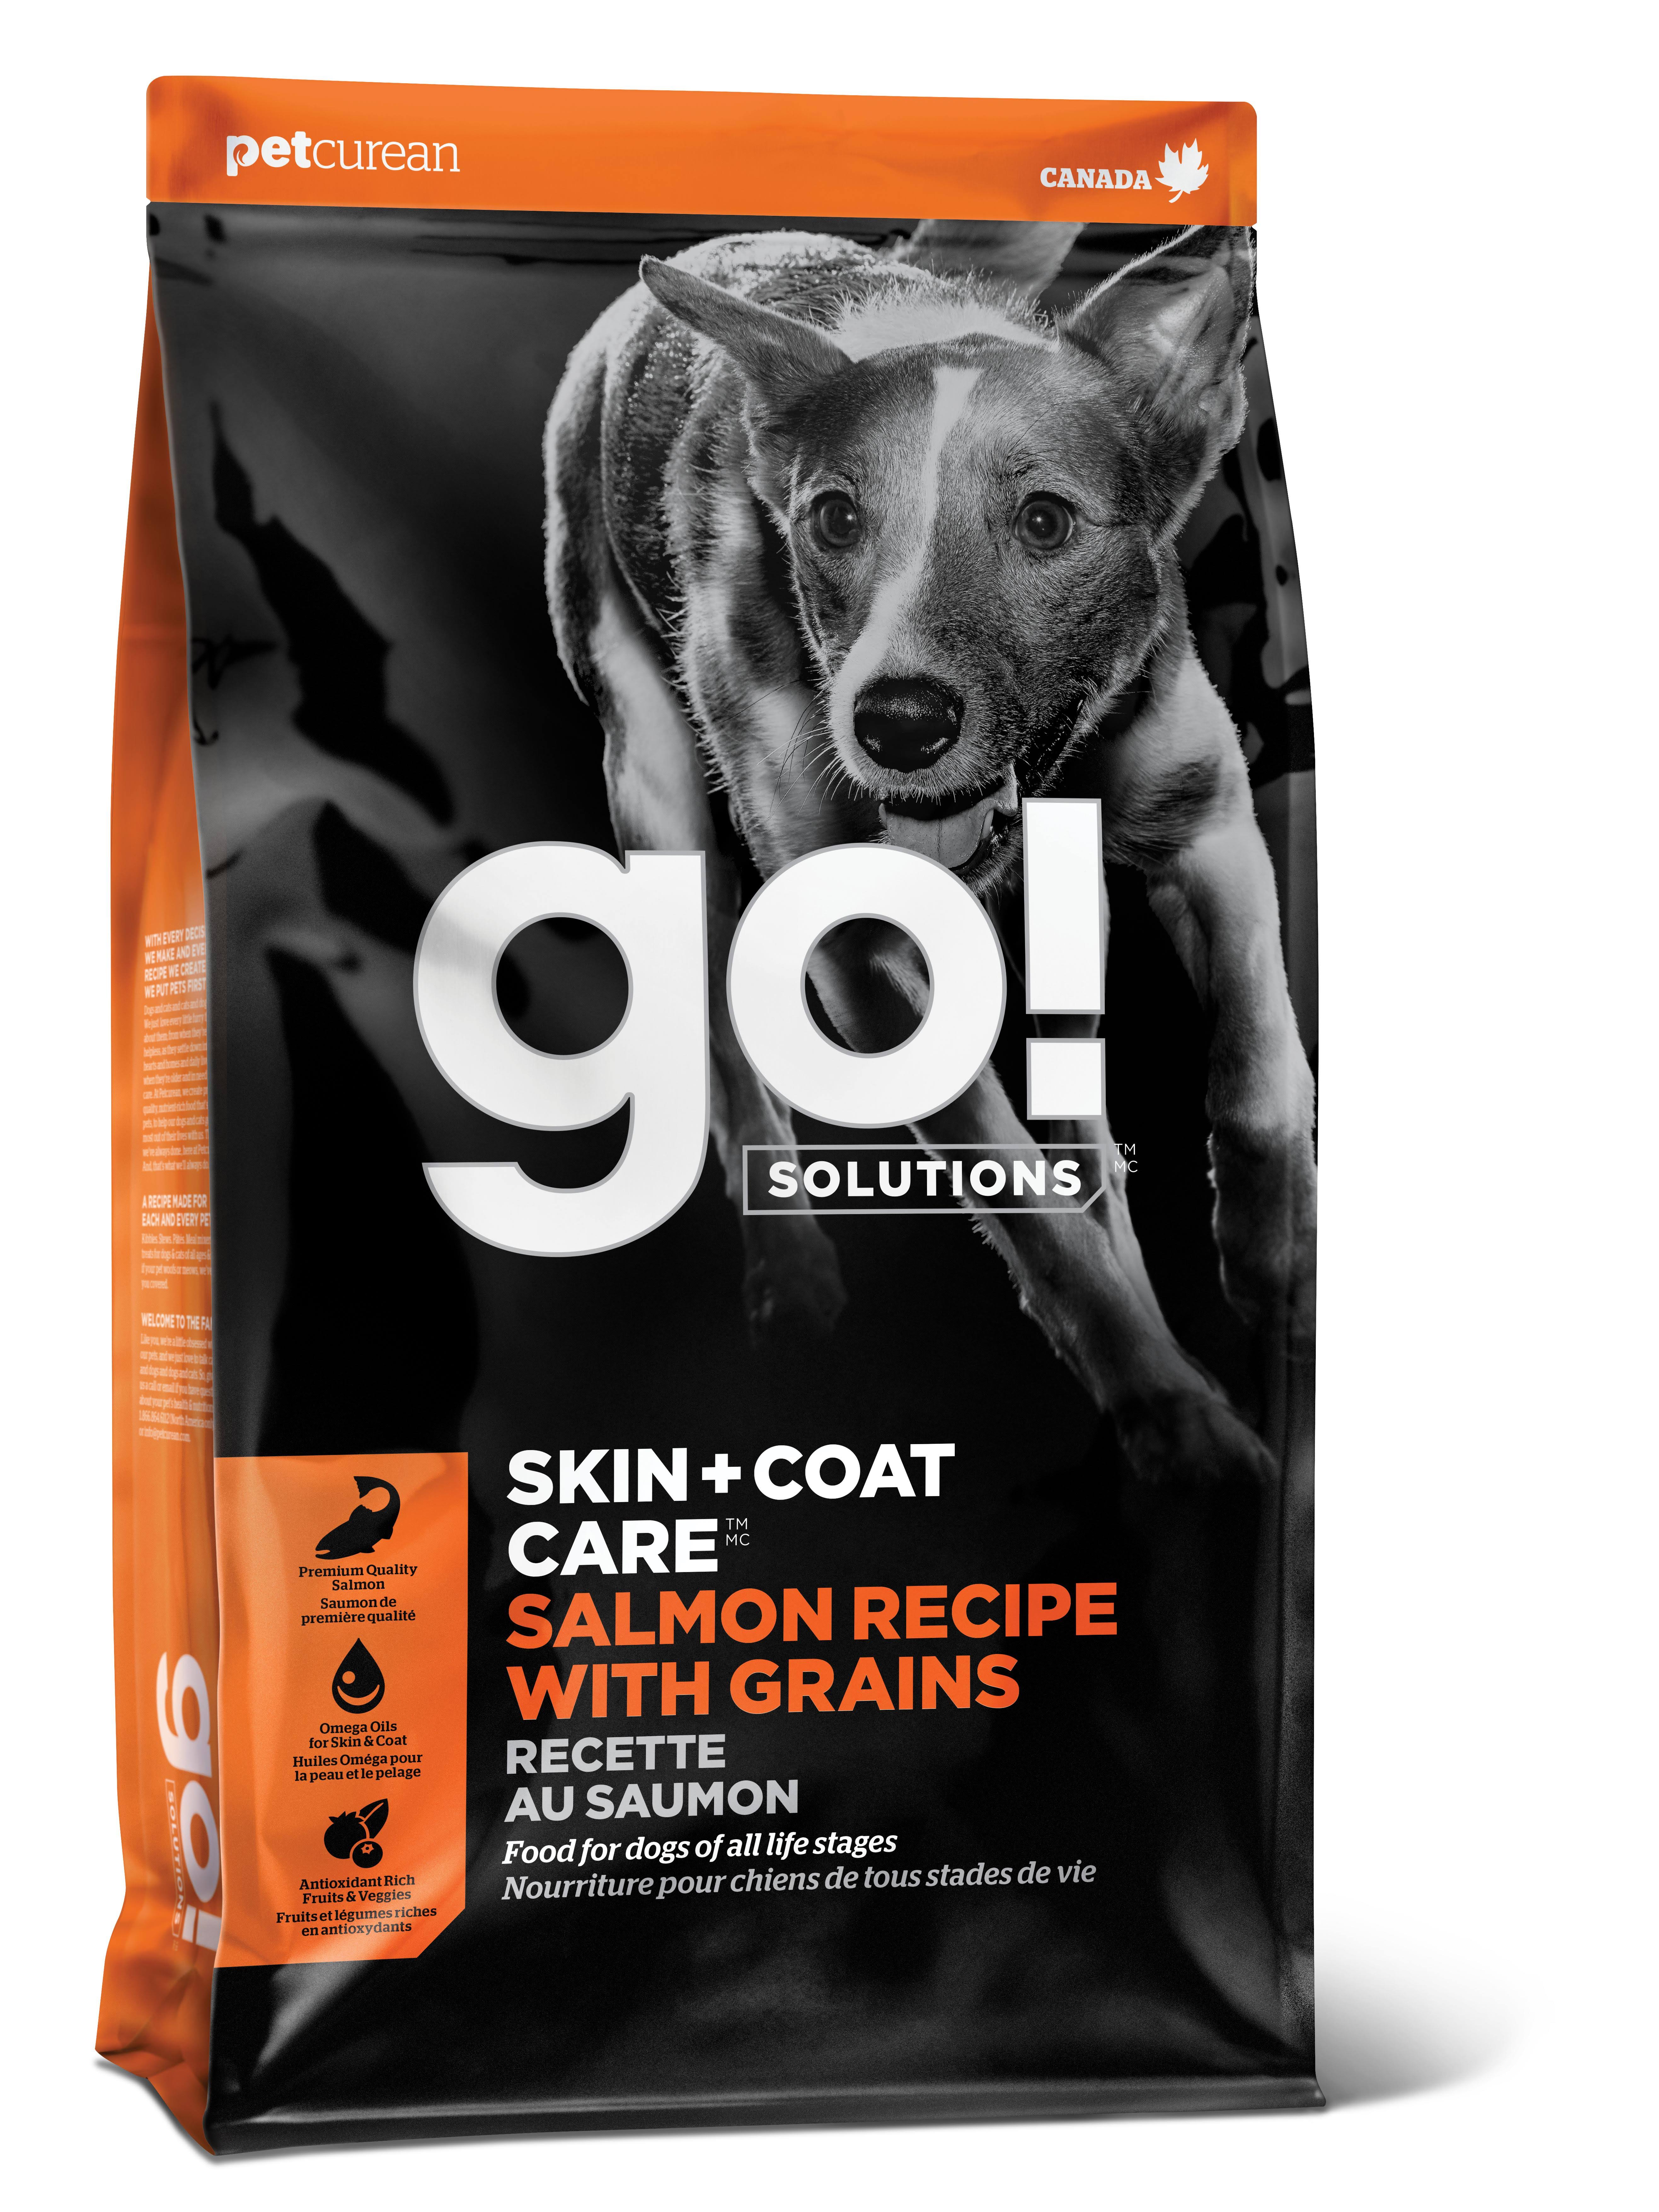 Go! Solutions Skin + Coat Care Salmon Recipe Dry Dog Food, 3.5 Pounds